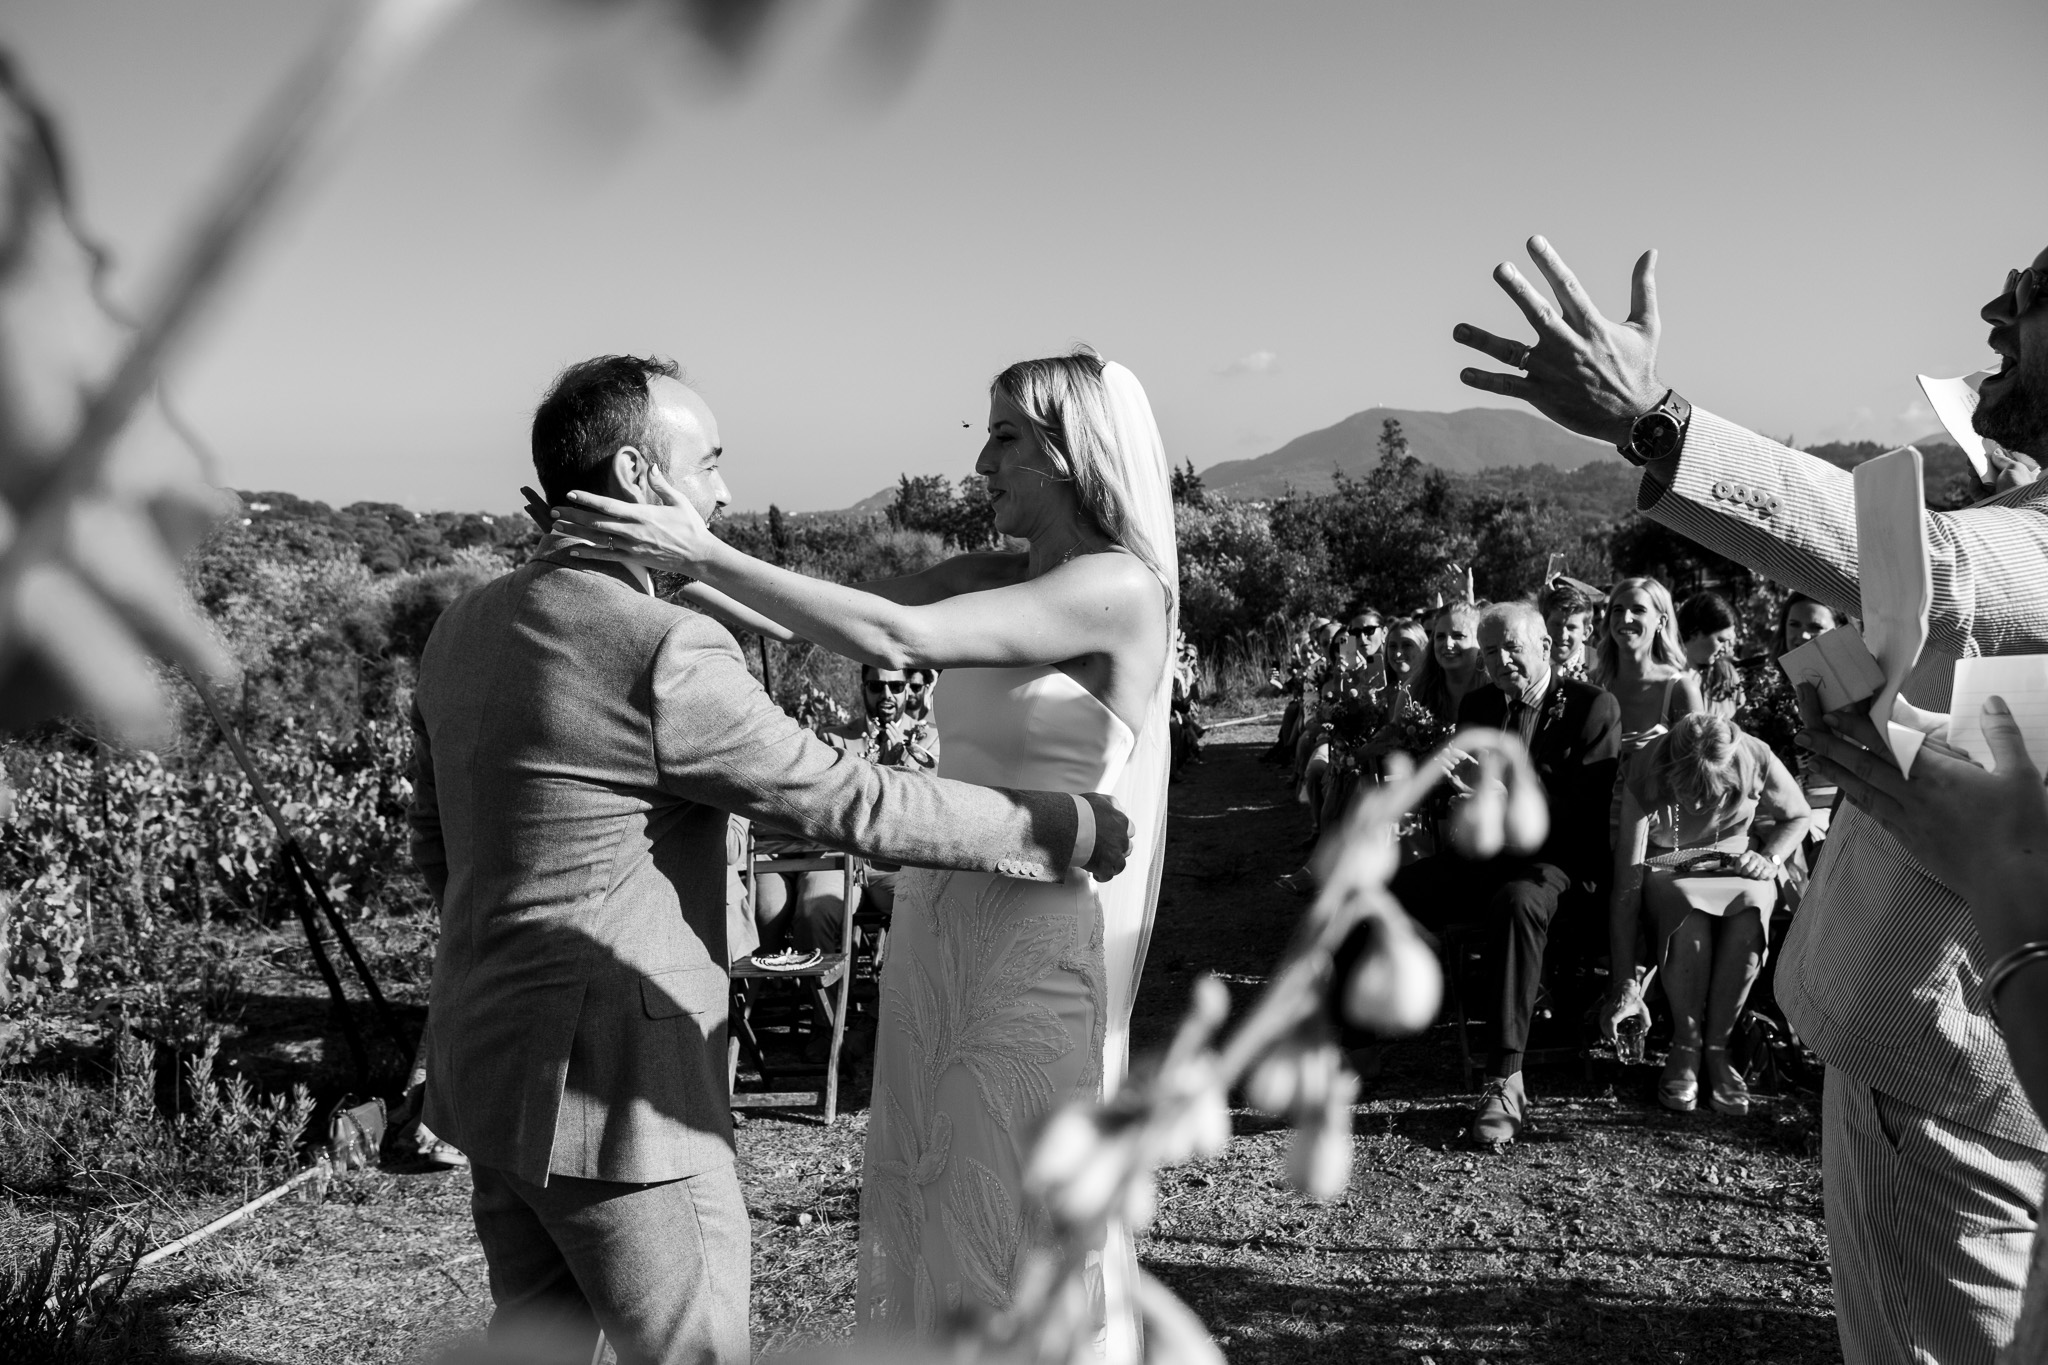 The celebrant holds out his arms whilst the bride and groom go in for an embrace during their wedding ceremony